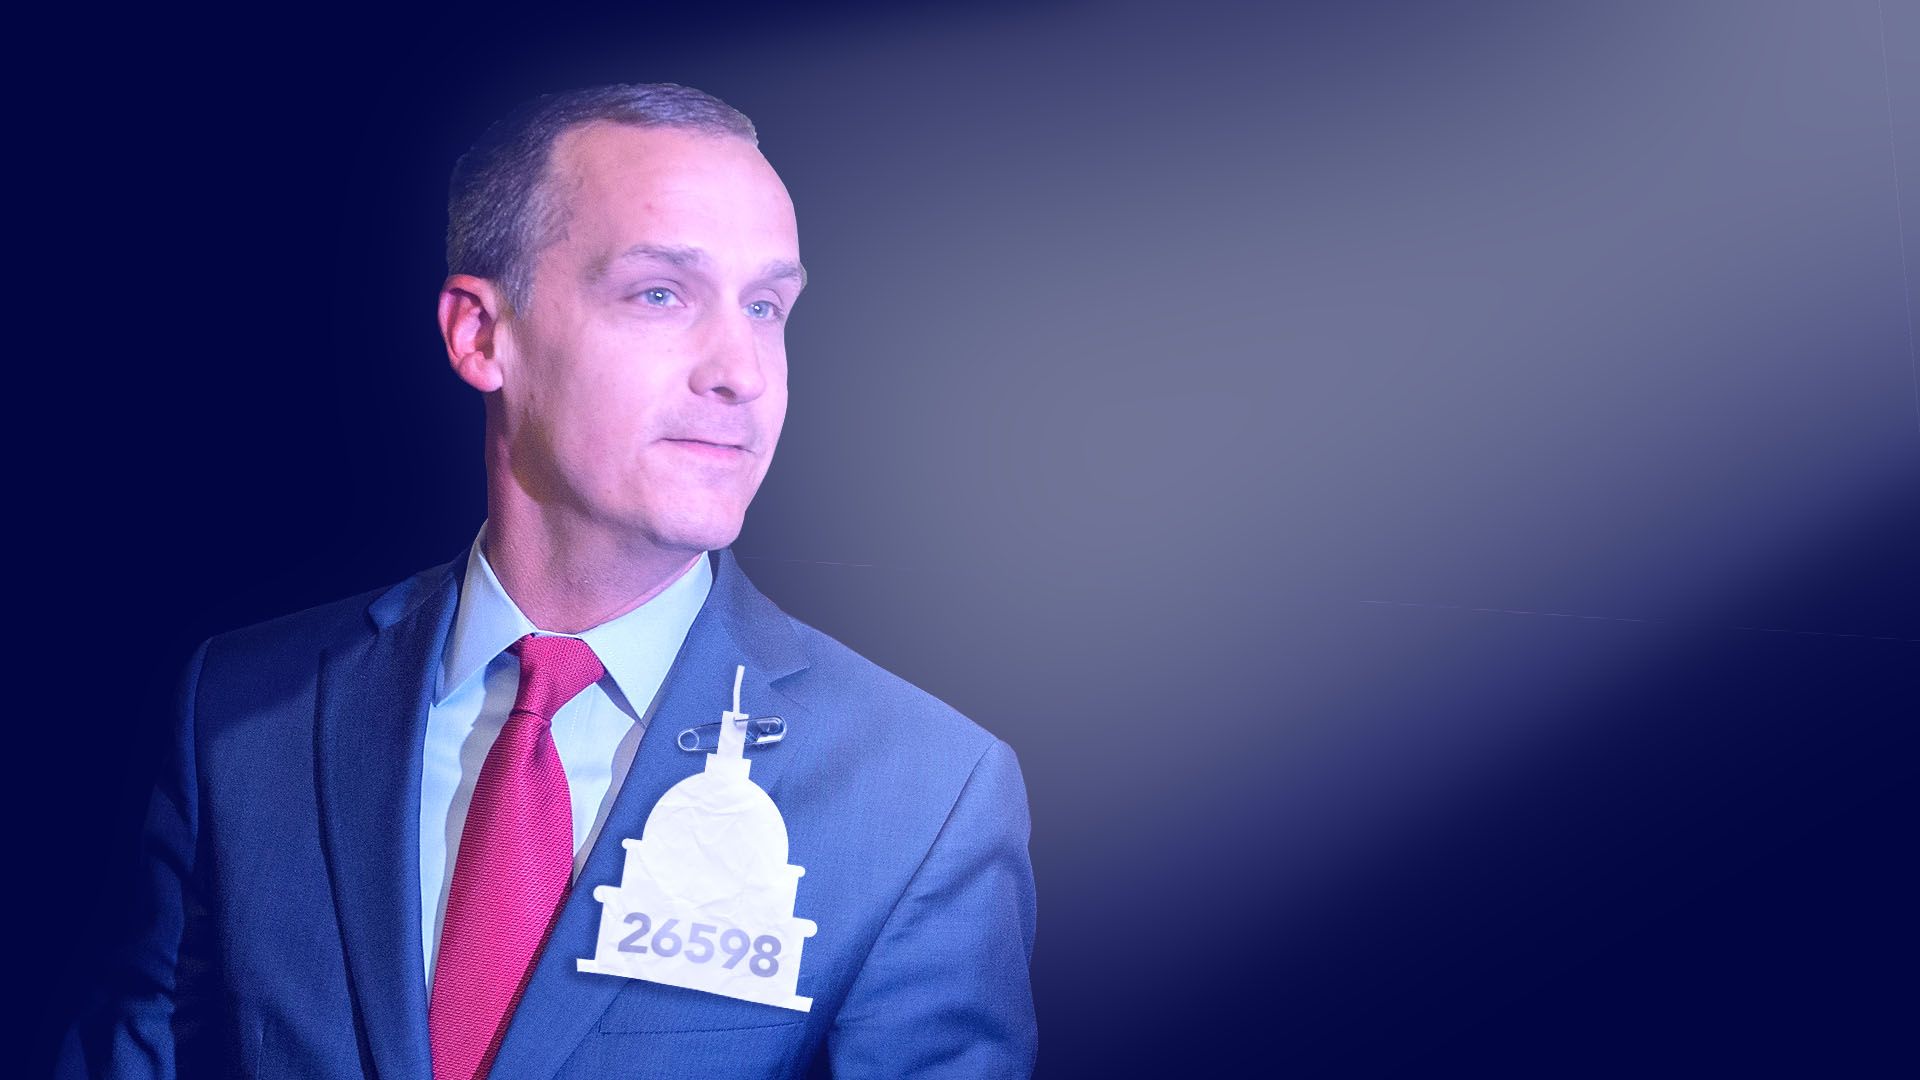 Illustration of Corey Lewandowski with a spotlight on hm and number pinned to his chest in the shape of the Capitol building